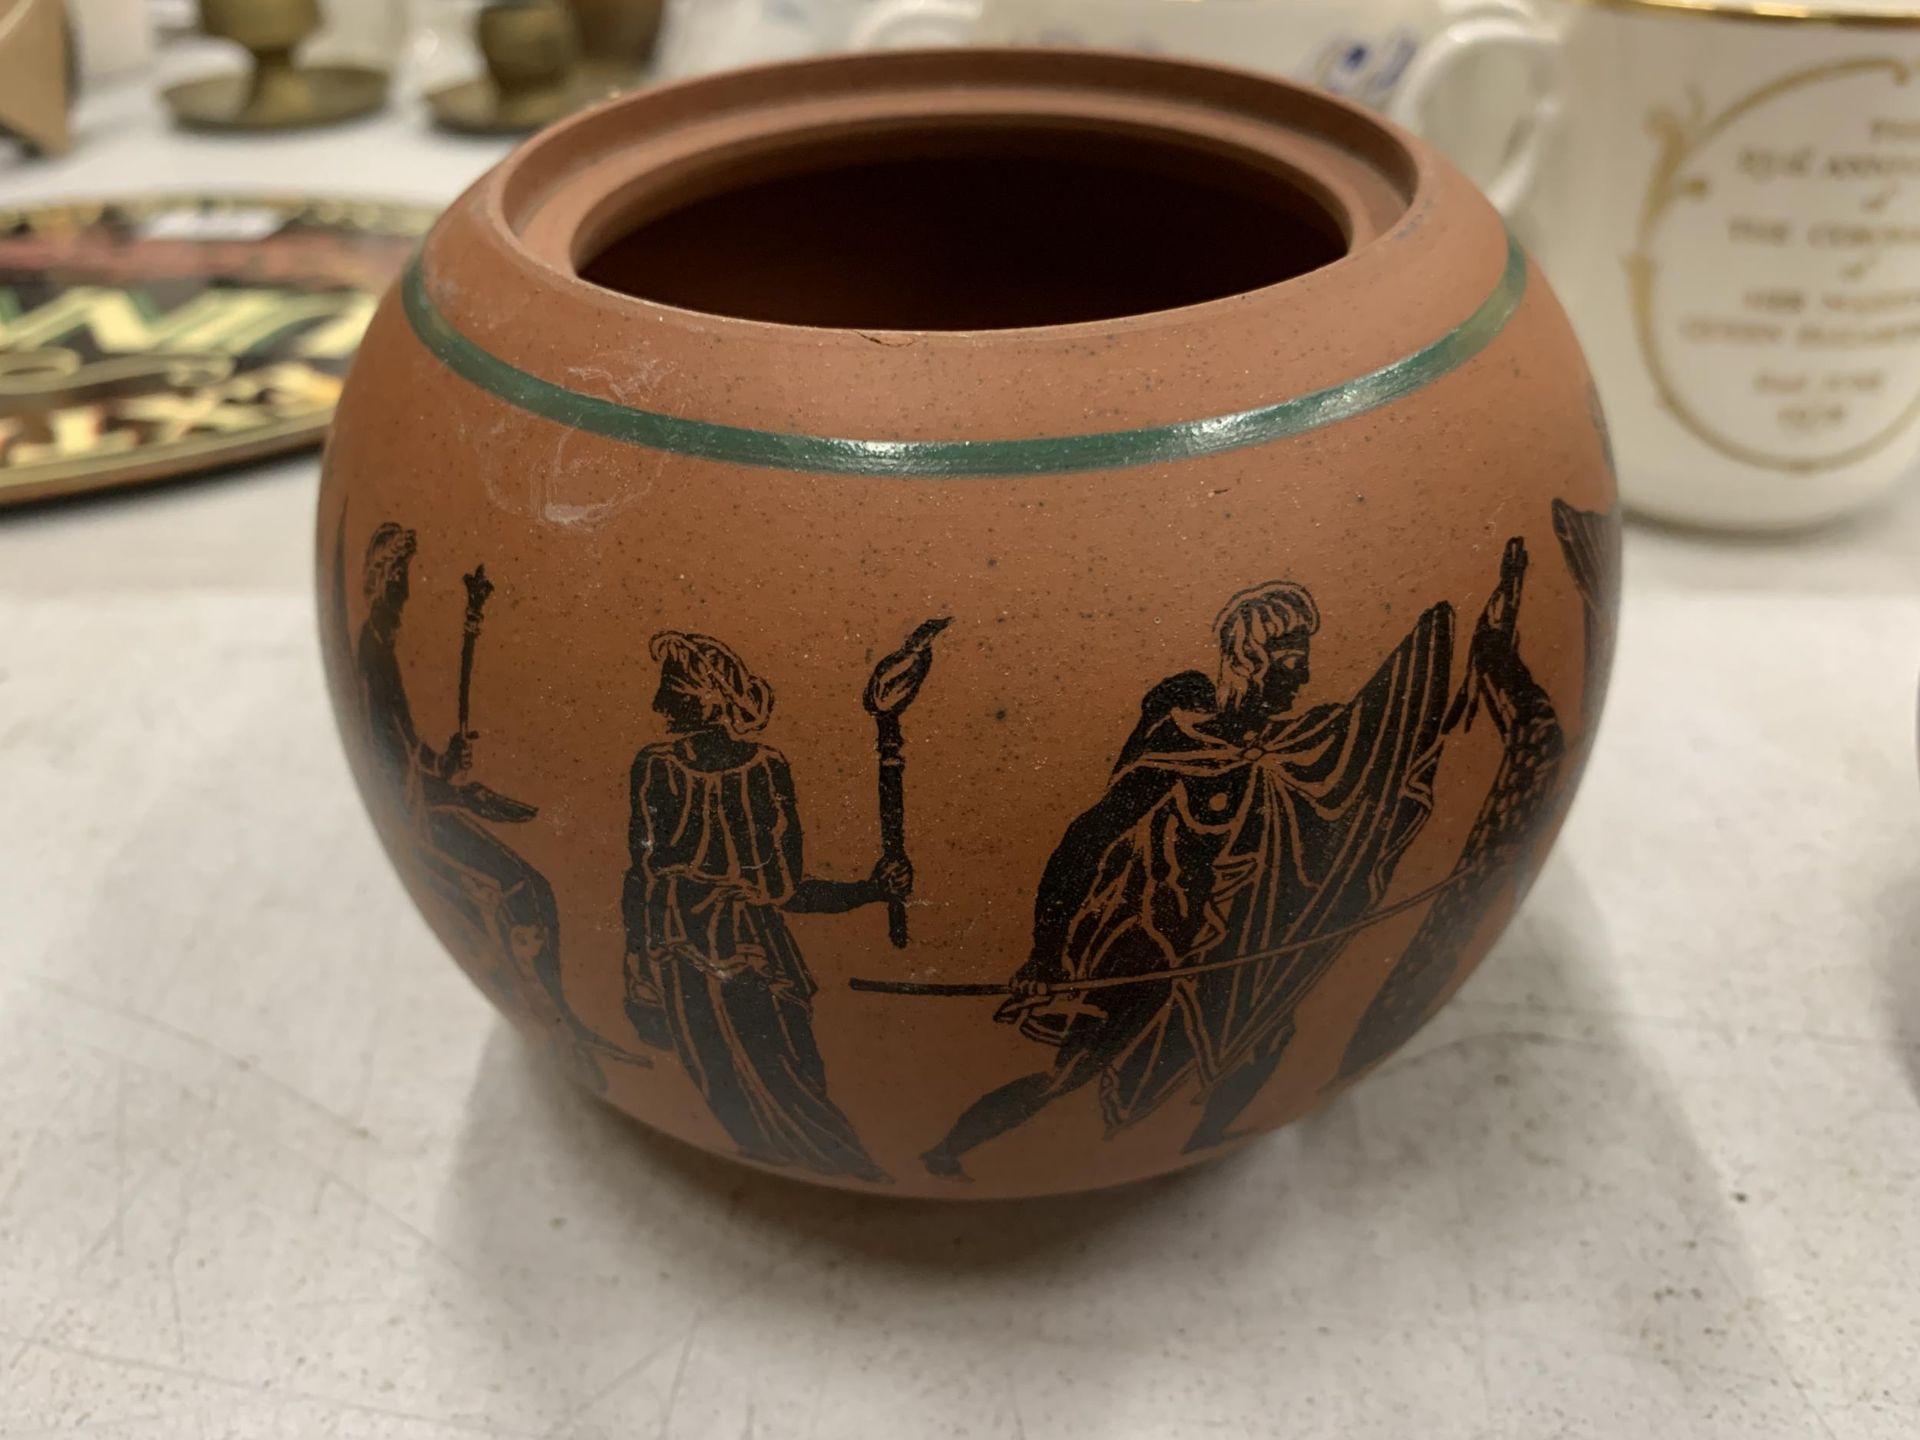 TWO CLIFTON GRECIAN CLASSICAL DESIGN JARS - Image 4 of 6